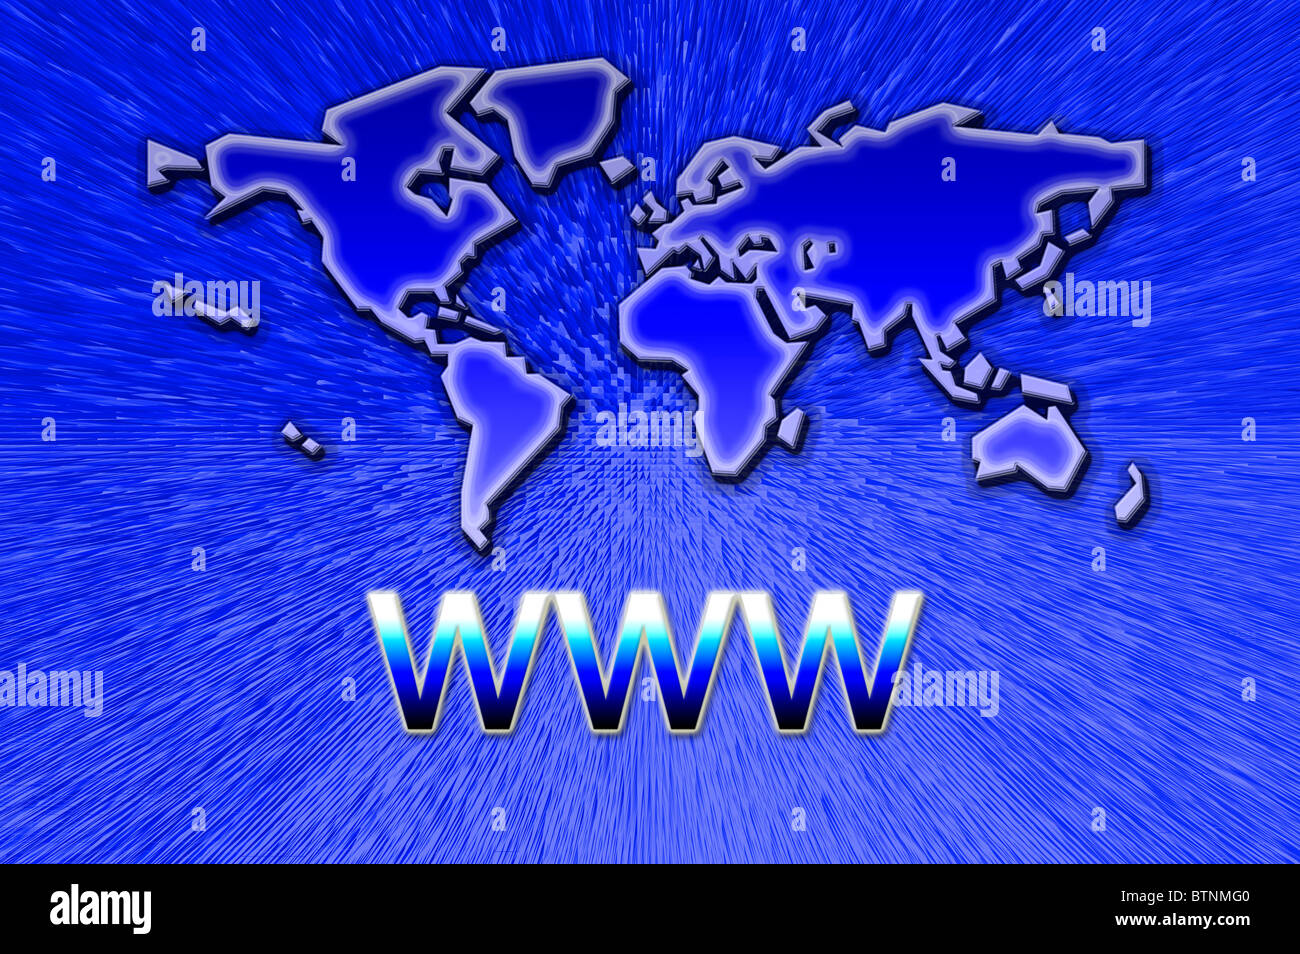 map of the world above the letters WWW on a blue radial background Stock Photo